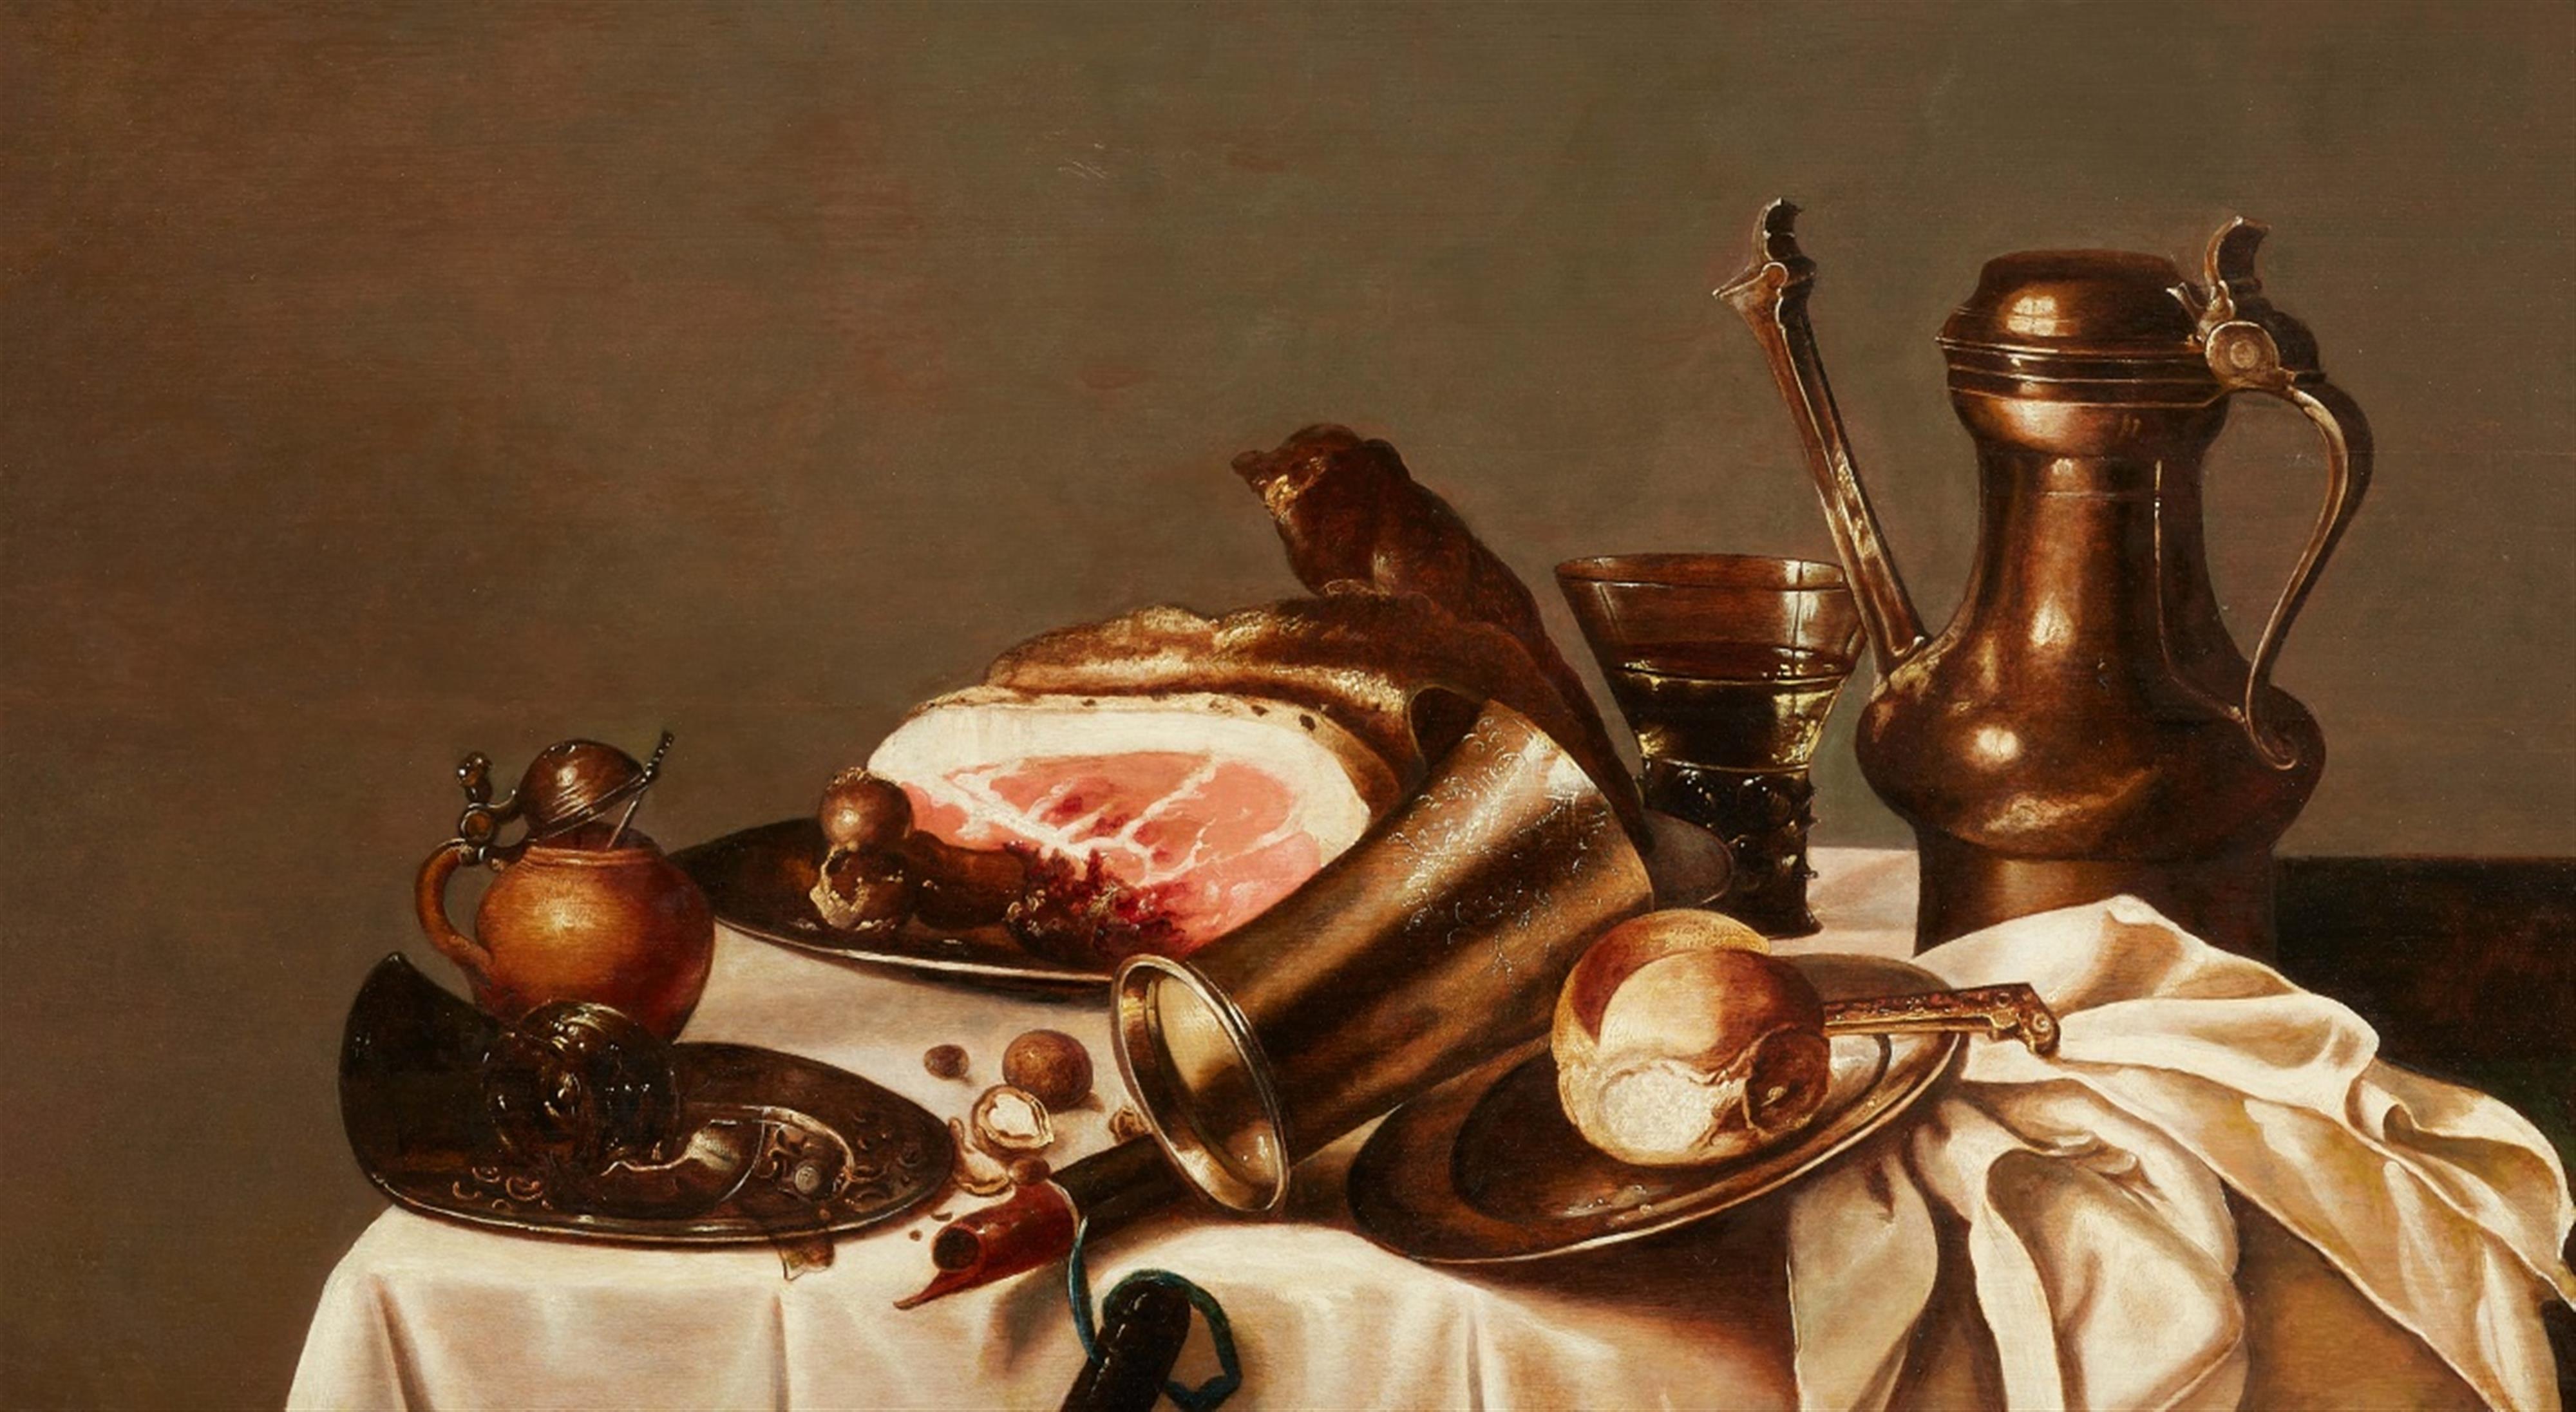 Pieter Claesz, attributed to - Supper Scene with a Pewter Jug, Ham, and a Silver Beaker - image-1